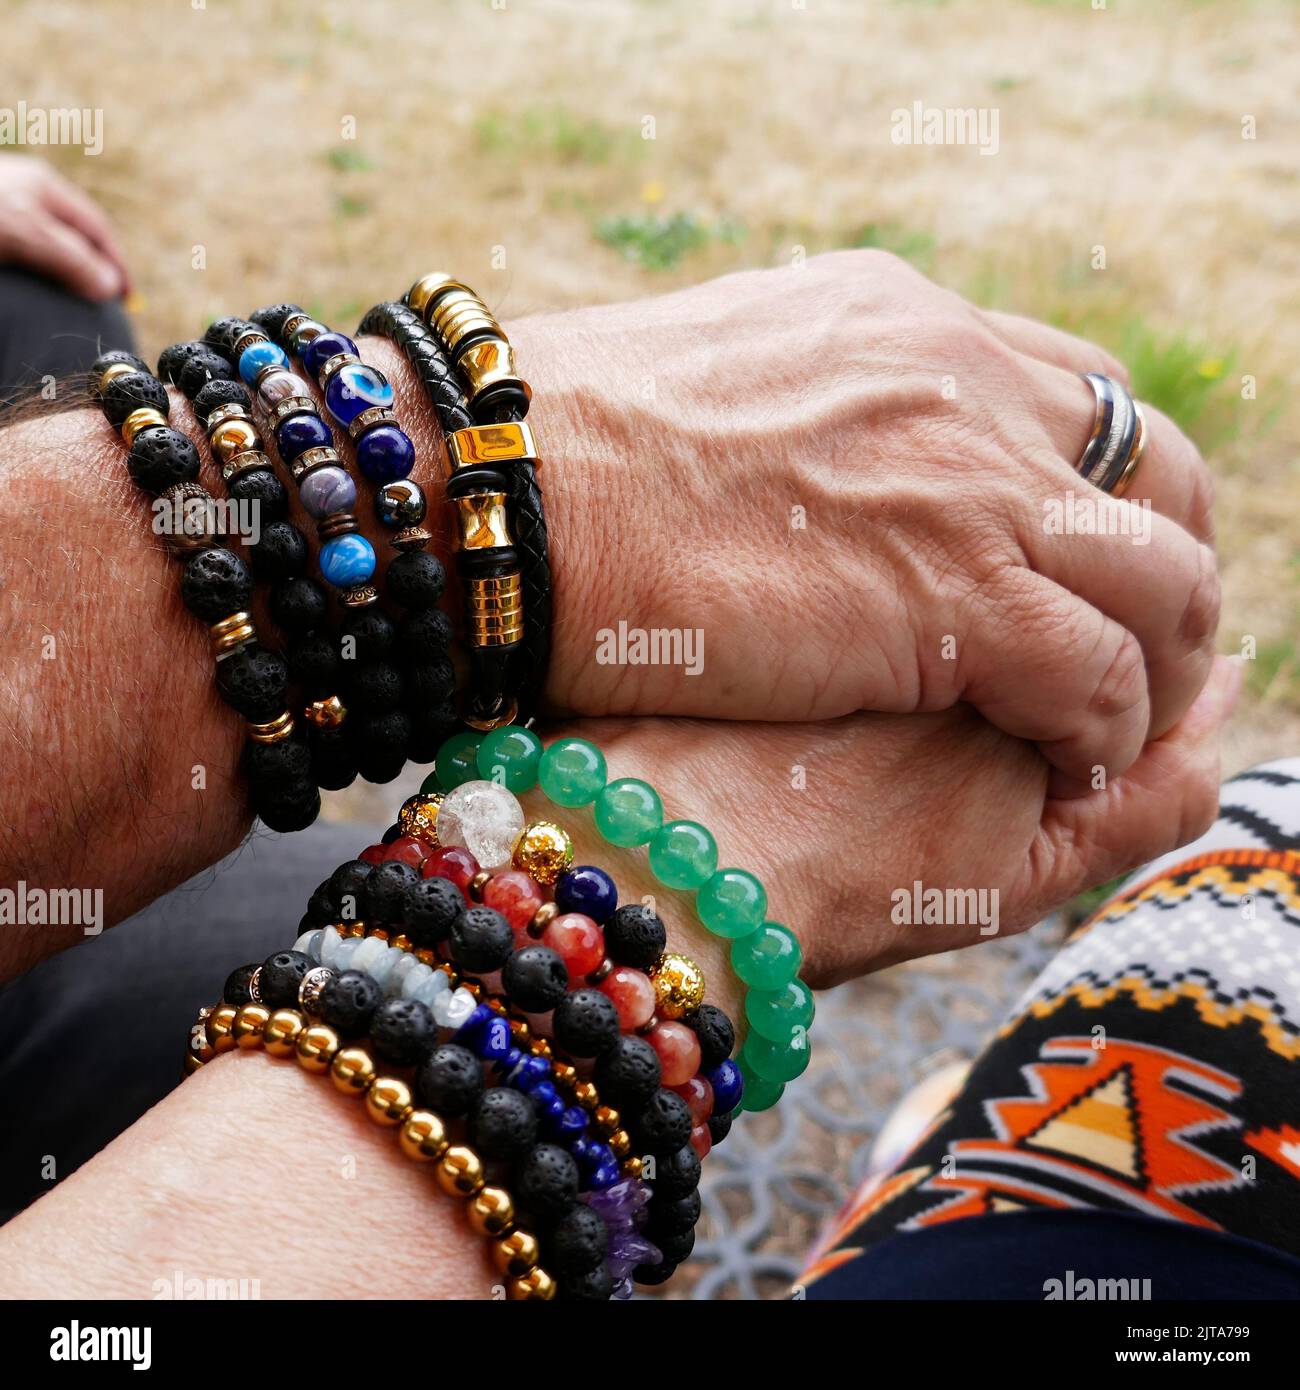 Senior couple holding hands. They are both fond of breaded bracelets. Pair look Stock Photo